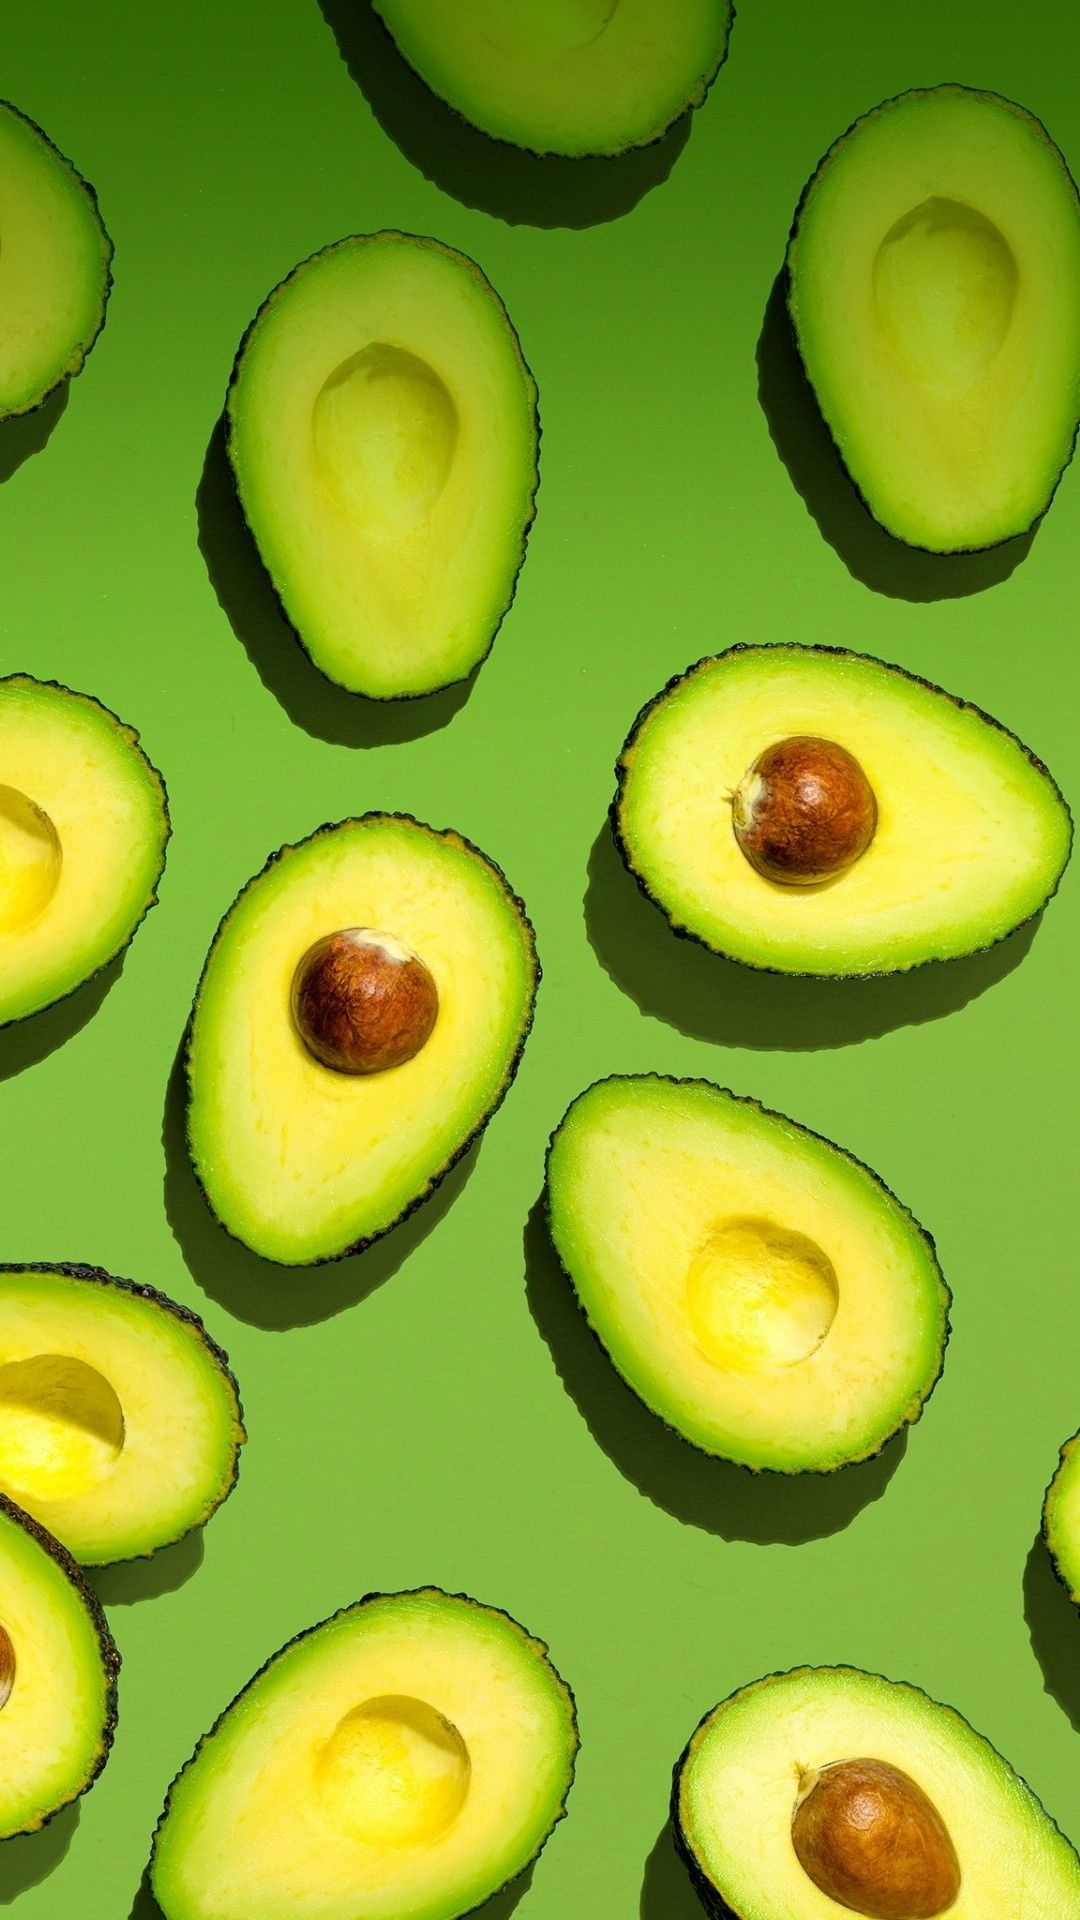 Avocado: Greenish or yellowish flesh with a buttery consistency, A rich nutty flavor. 1080x1920 Full HD Background.